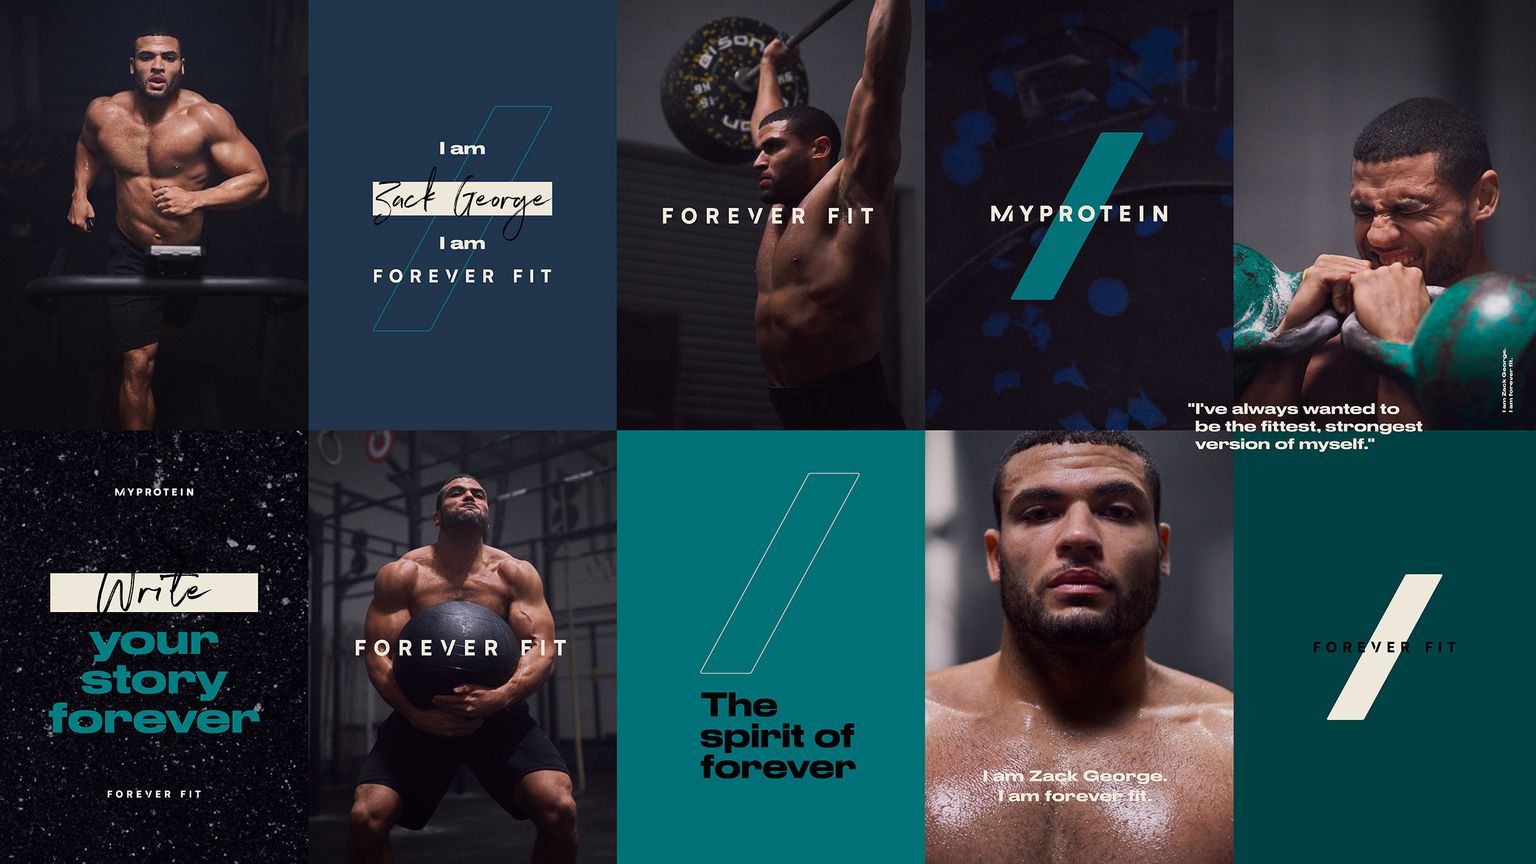 FOREVER FIT ATHLETE STORIES MASTER4 copy